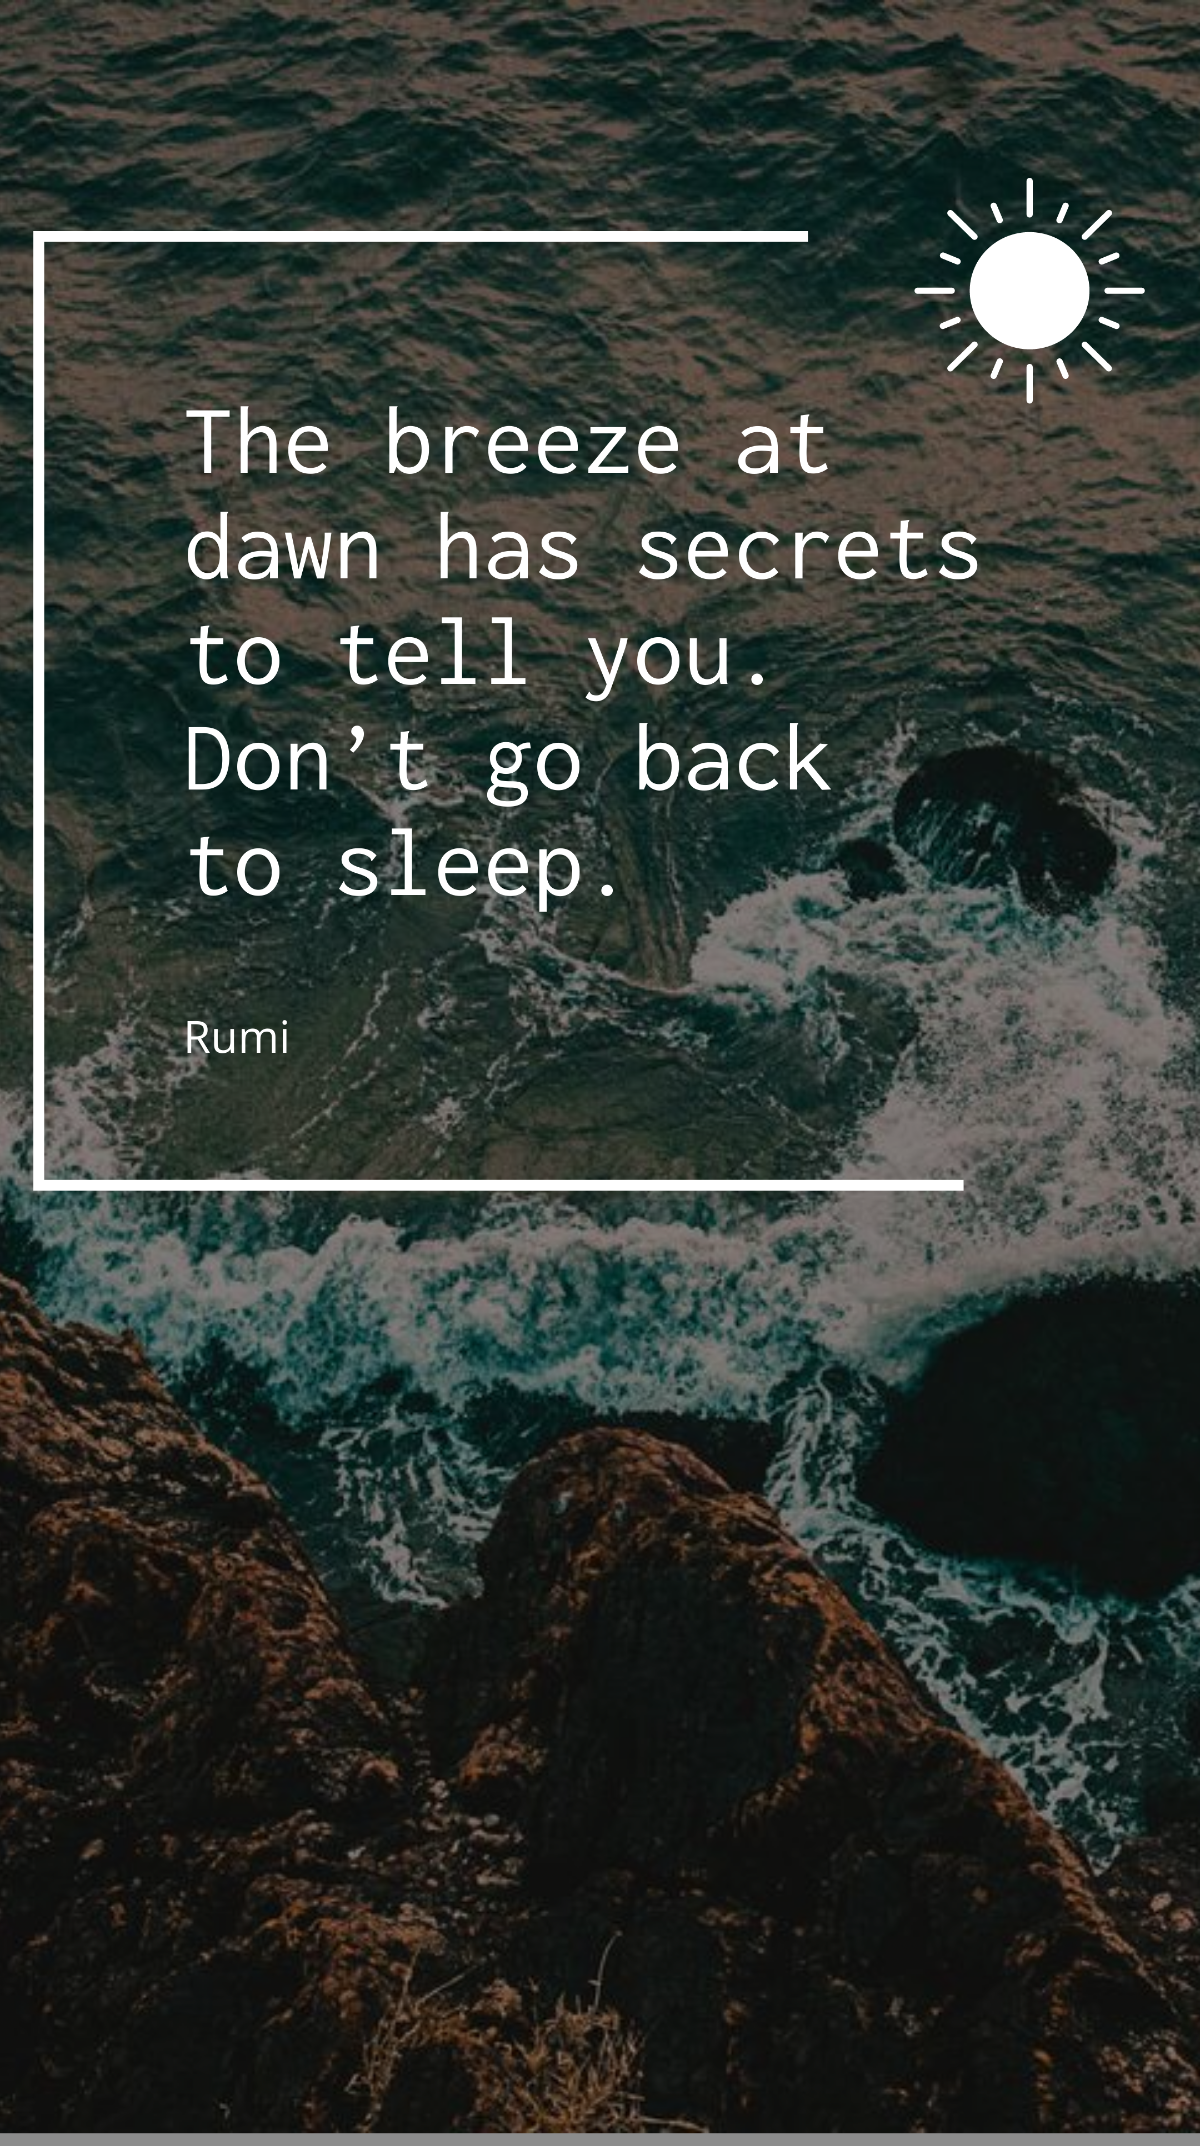 Rumi - The breeze at dawn has secrets to tell you. Don’t go back to sleep. Template